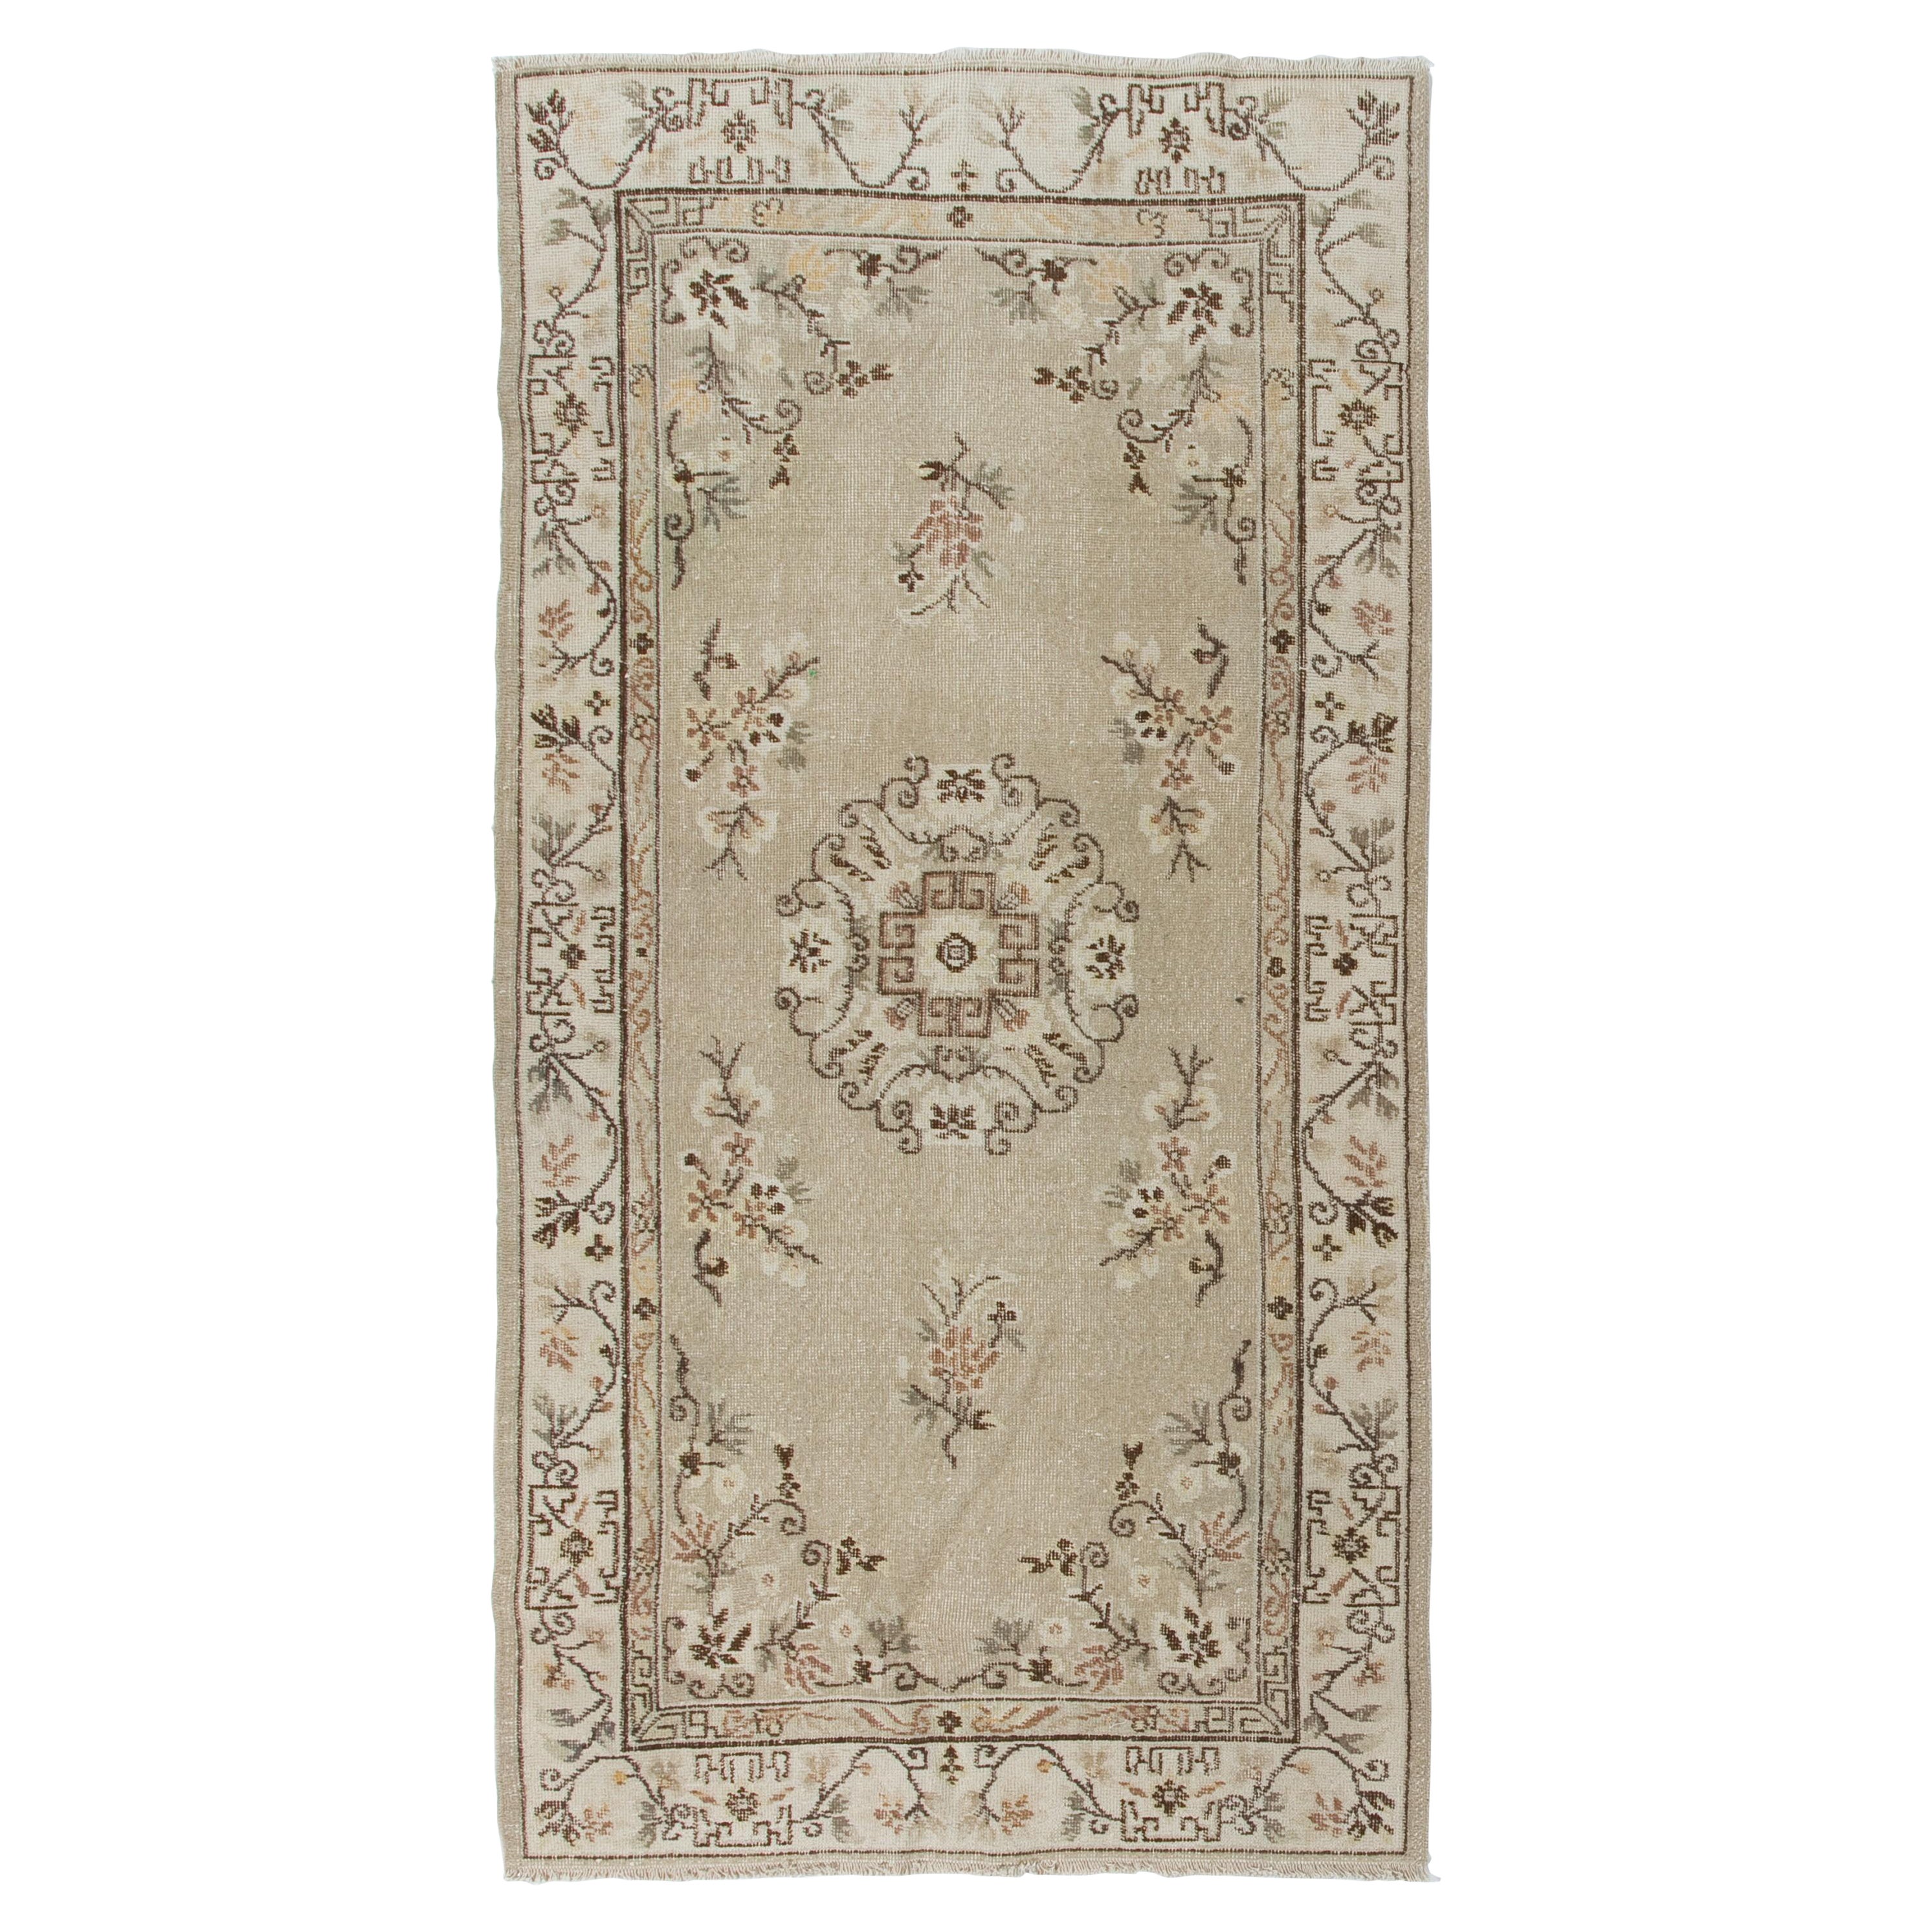 3.8x7.2 ft Beige Hand-Knotted Vintage Accent Rug with Art Deco Chinese Design